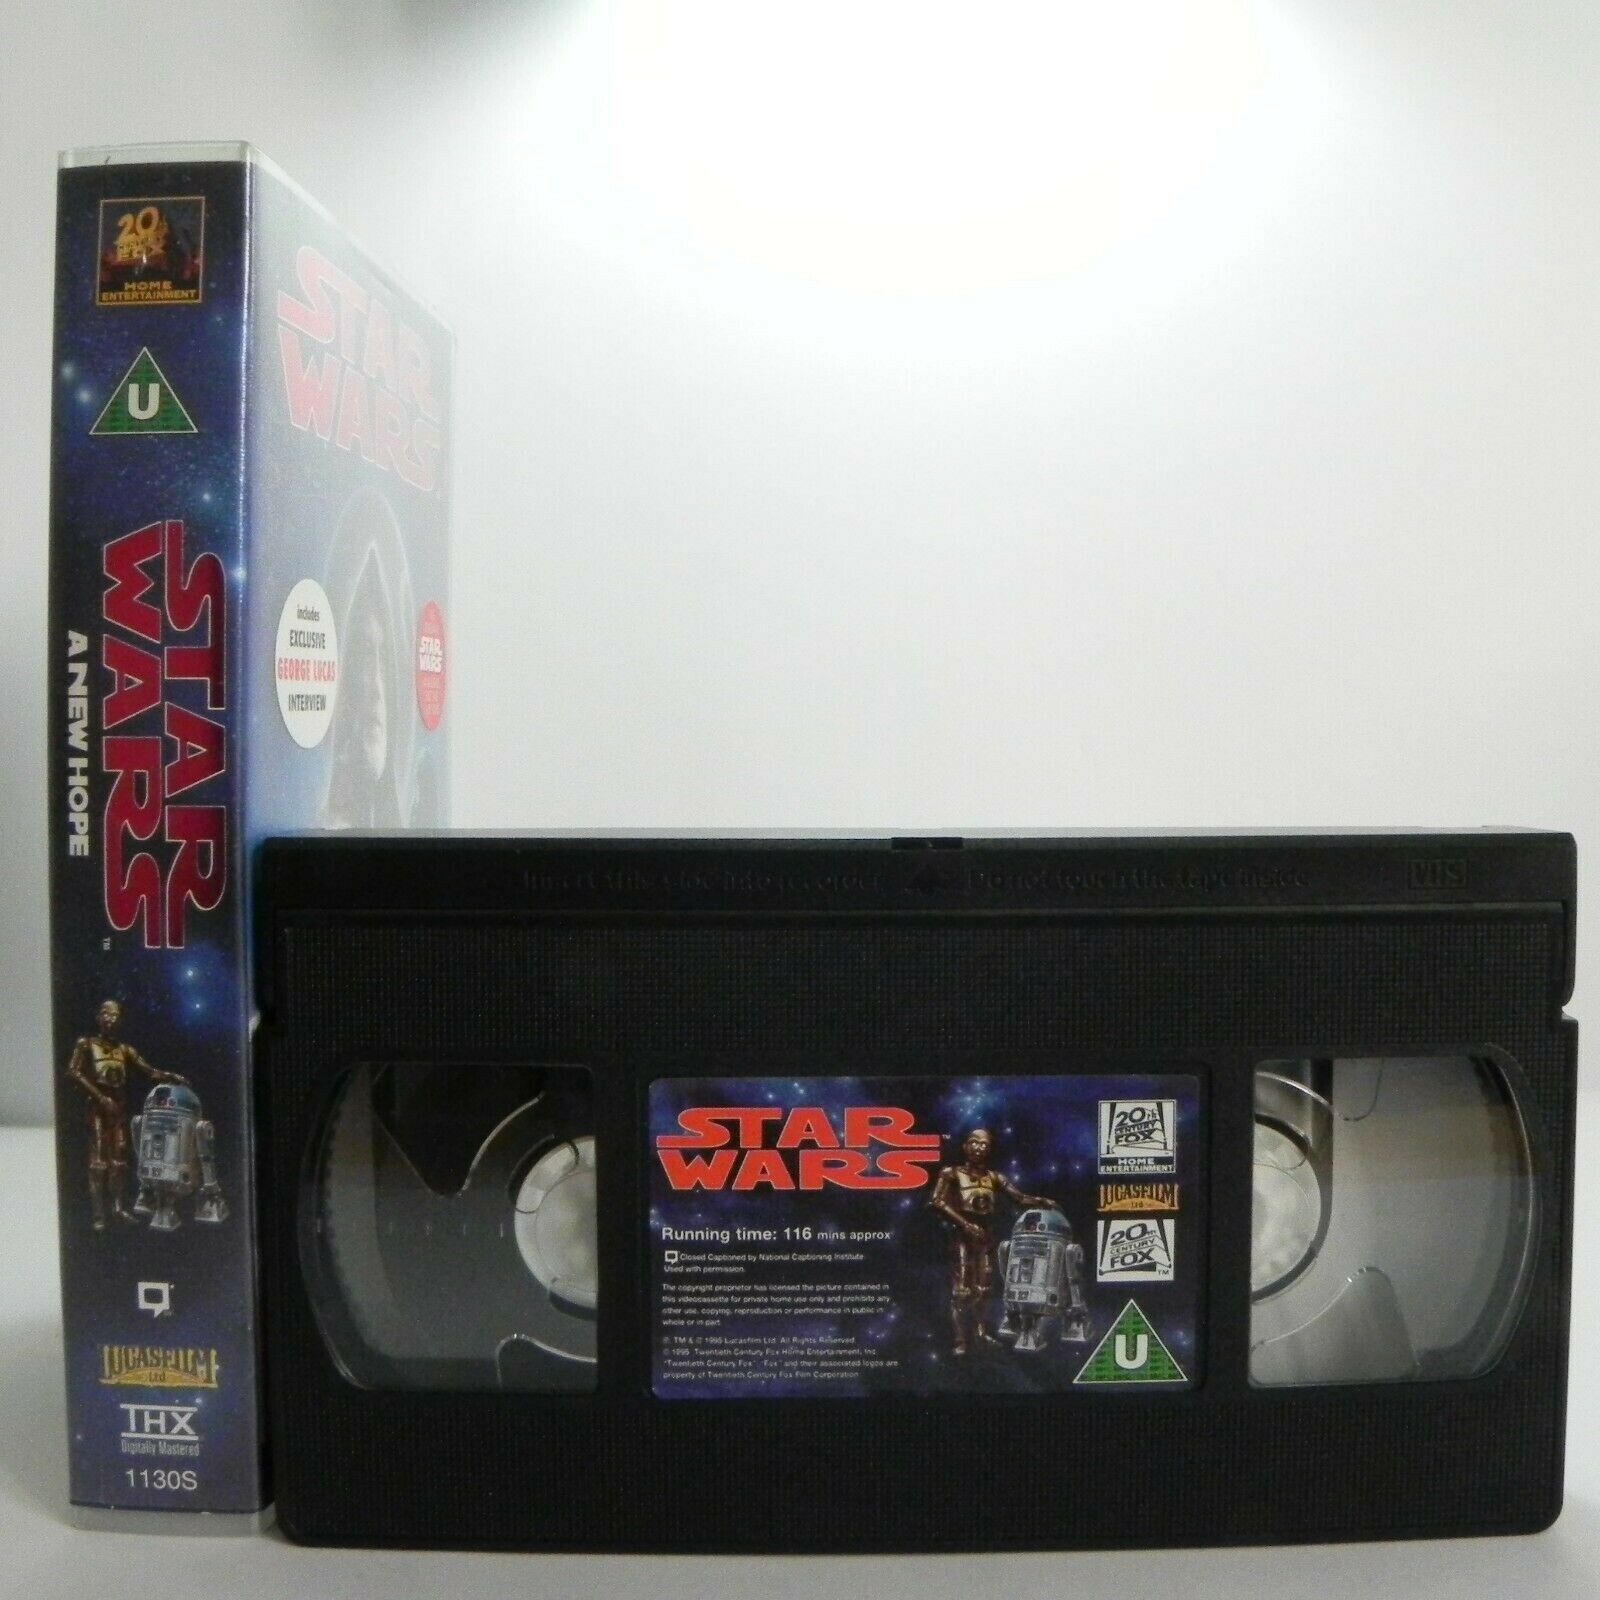 Star Wars: By G.Lucas - - Space Fantasy - Classic Adventure - Children's - VHS-